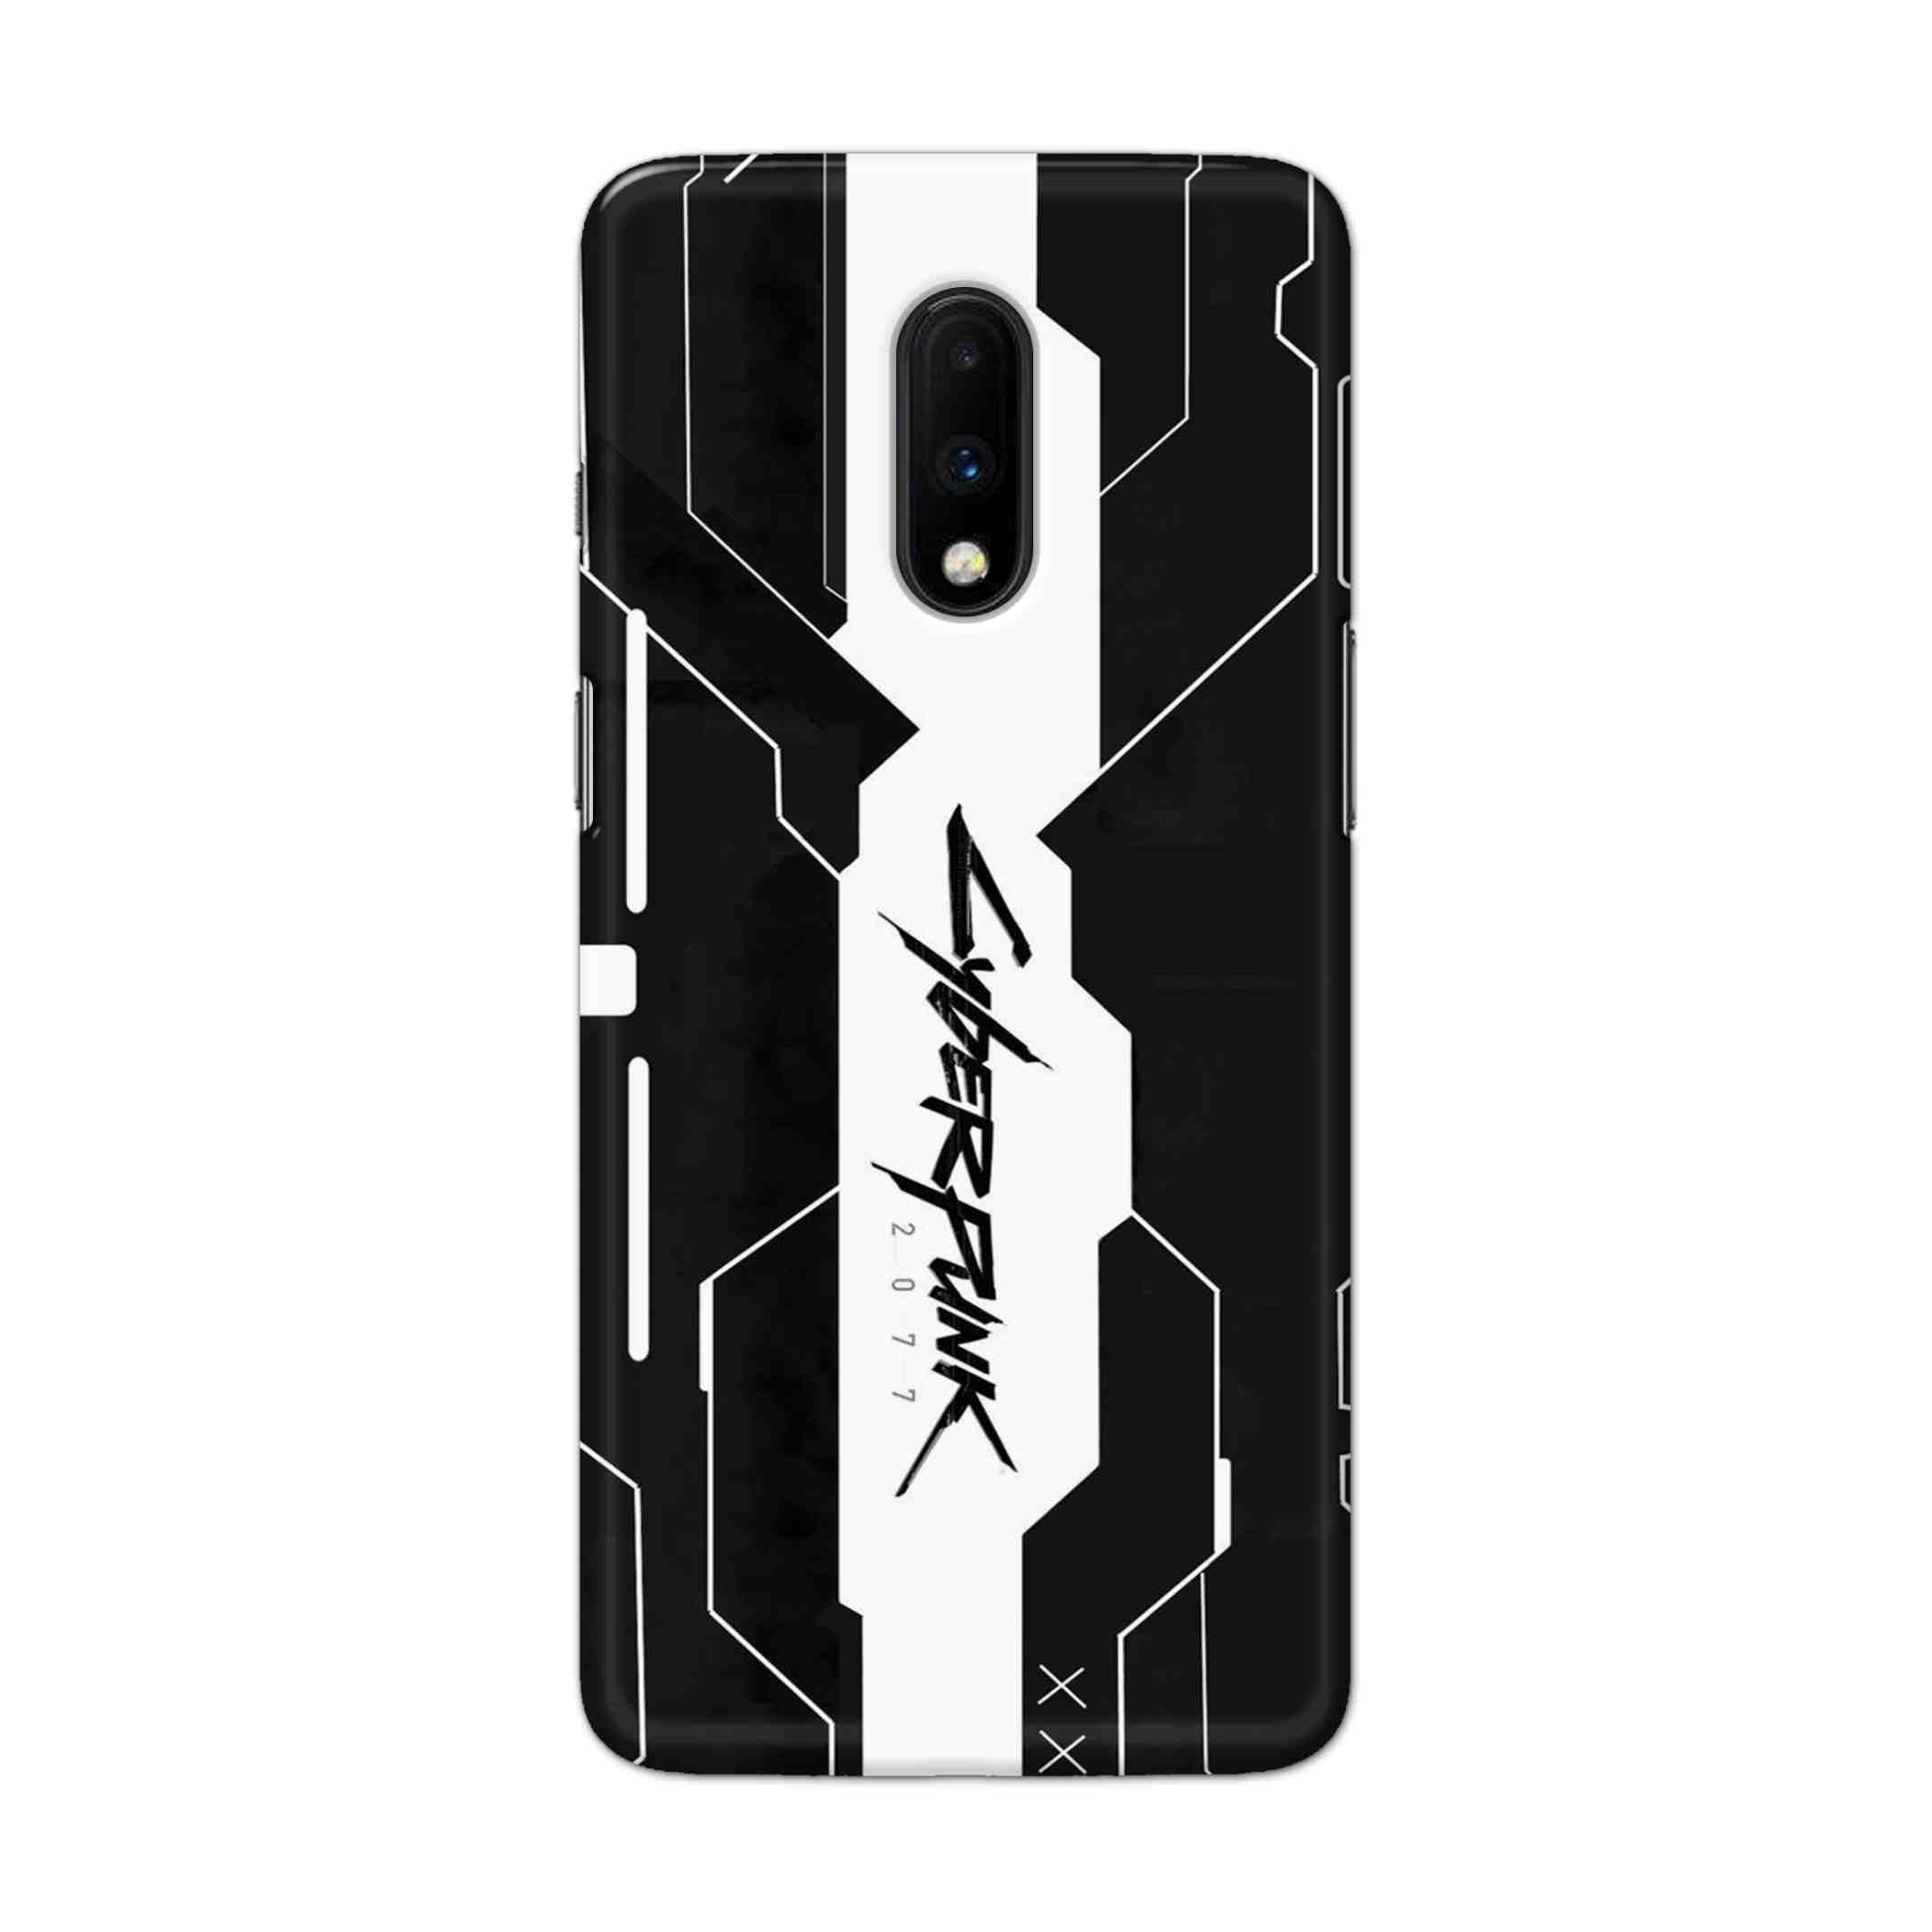 Buy Cyberpunk 2077 Art Hard Back Mobile Phone Case Cover For OnePlus 7 Online